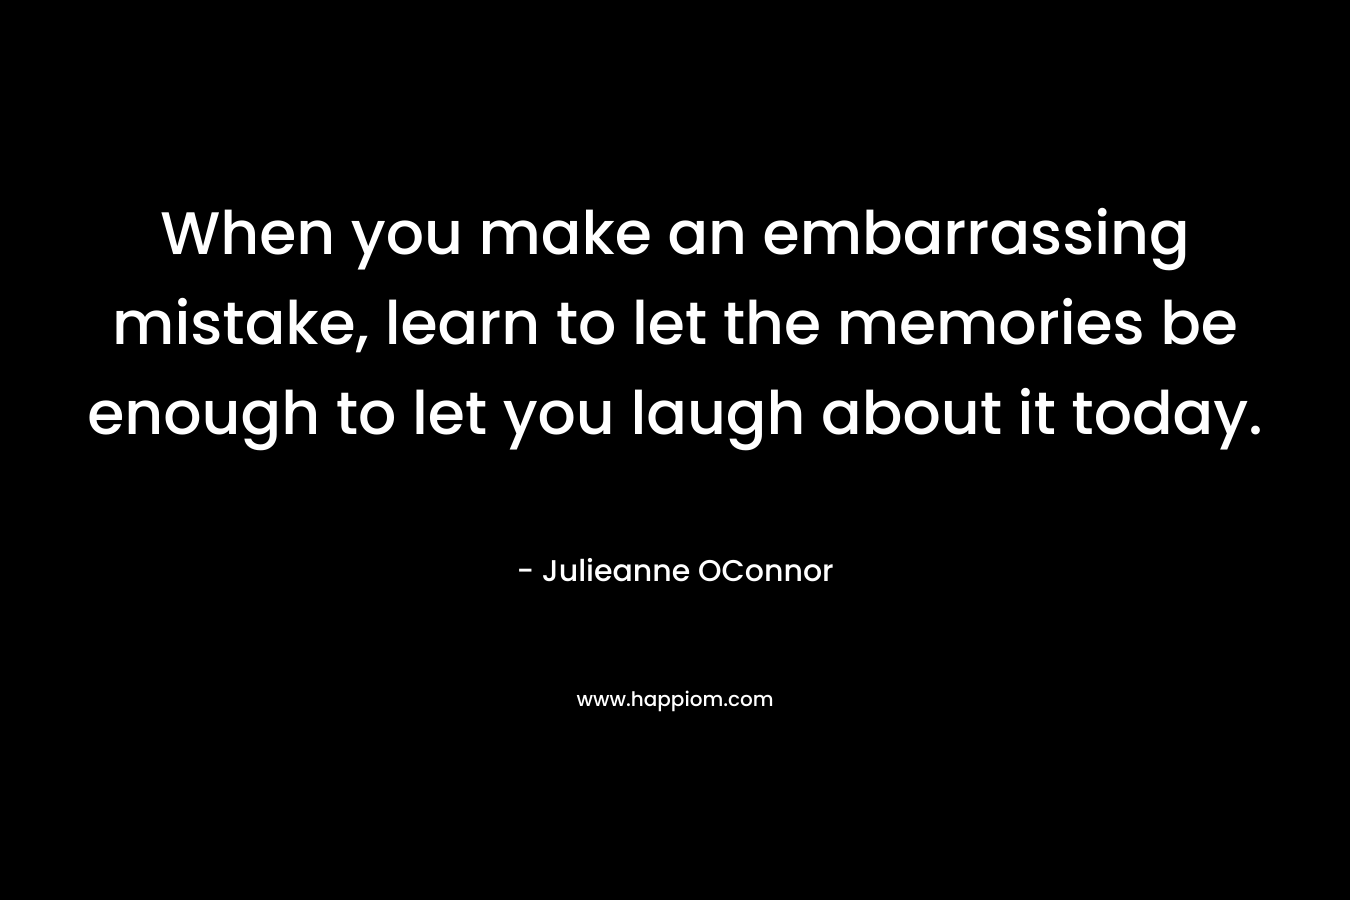 When you make an embarrassing mistake, learn to let the memories be enough to let you laugh about it today.